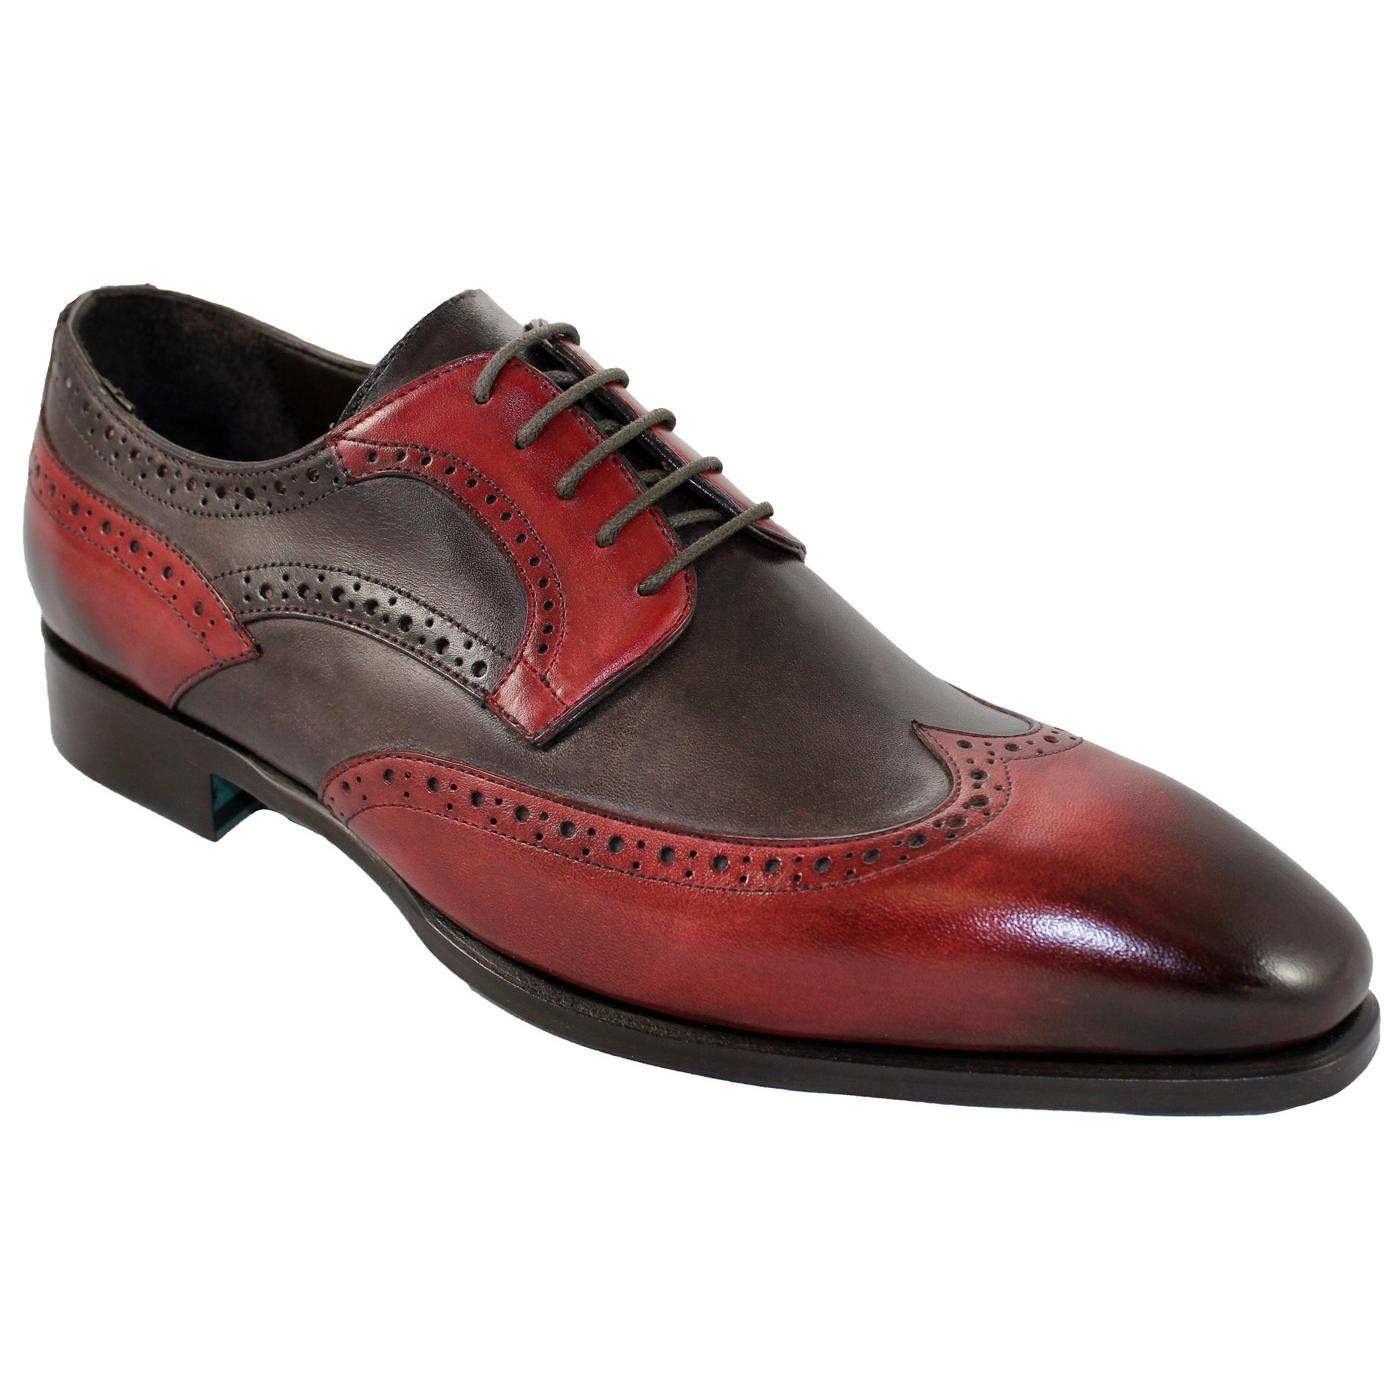 Emilio Franco 27174 Red / Brown Genuine Calf Leather Shoes. - $309.90 ...